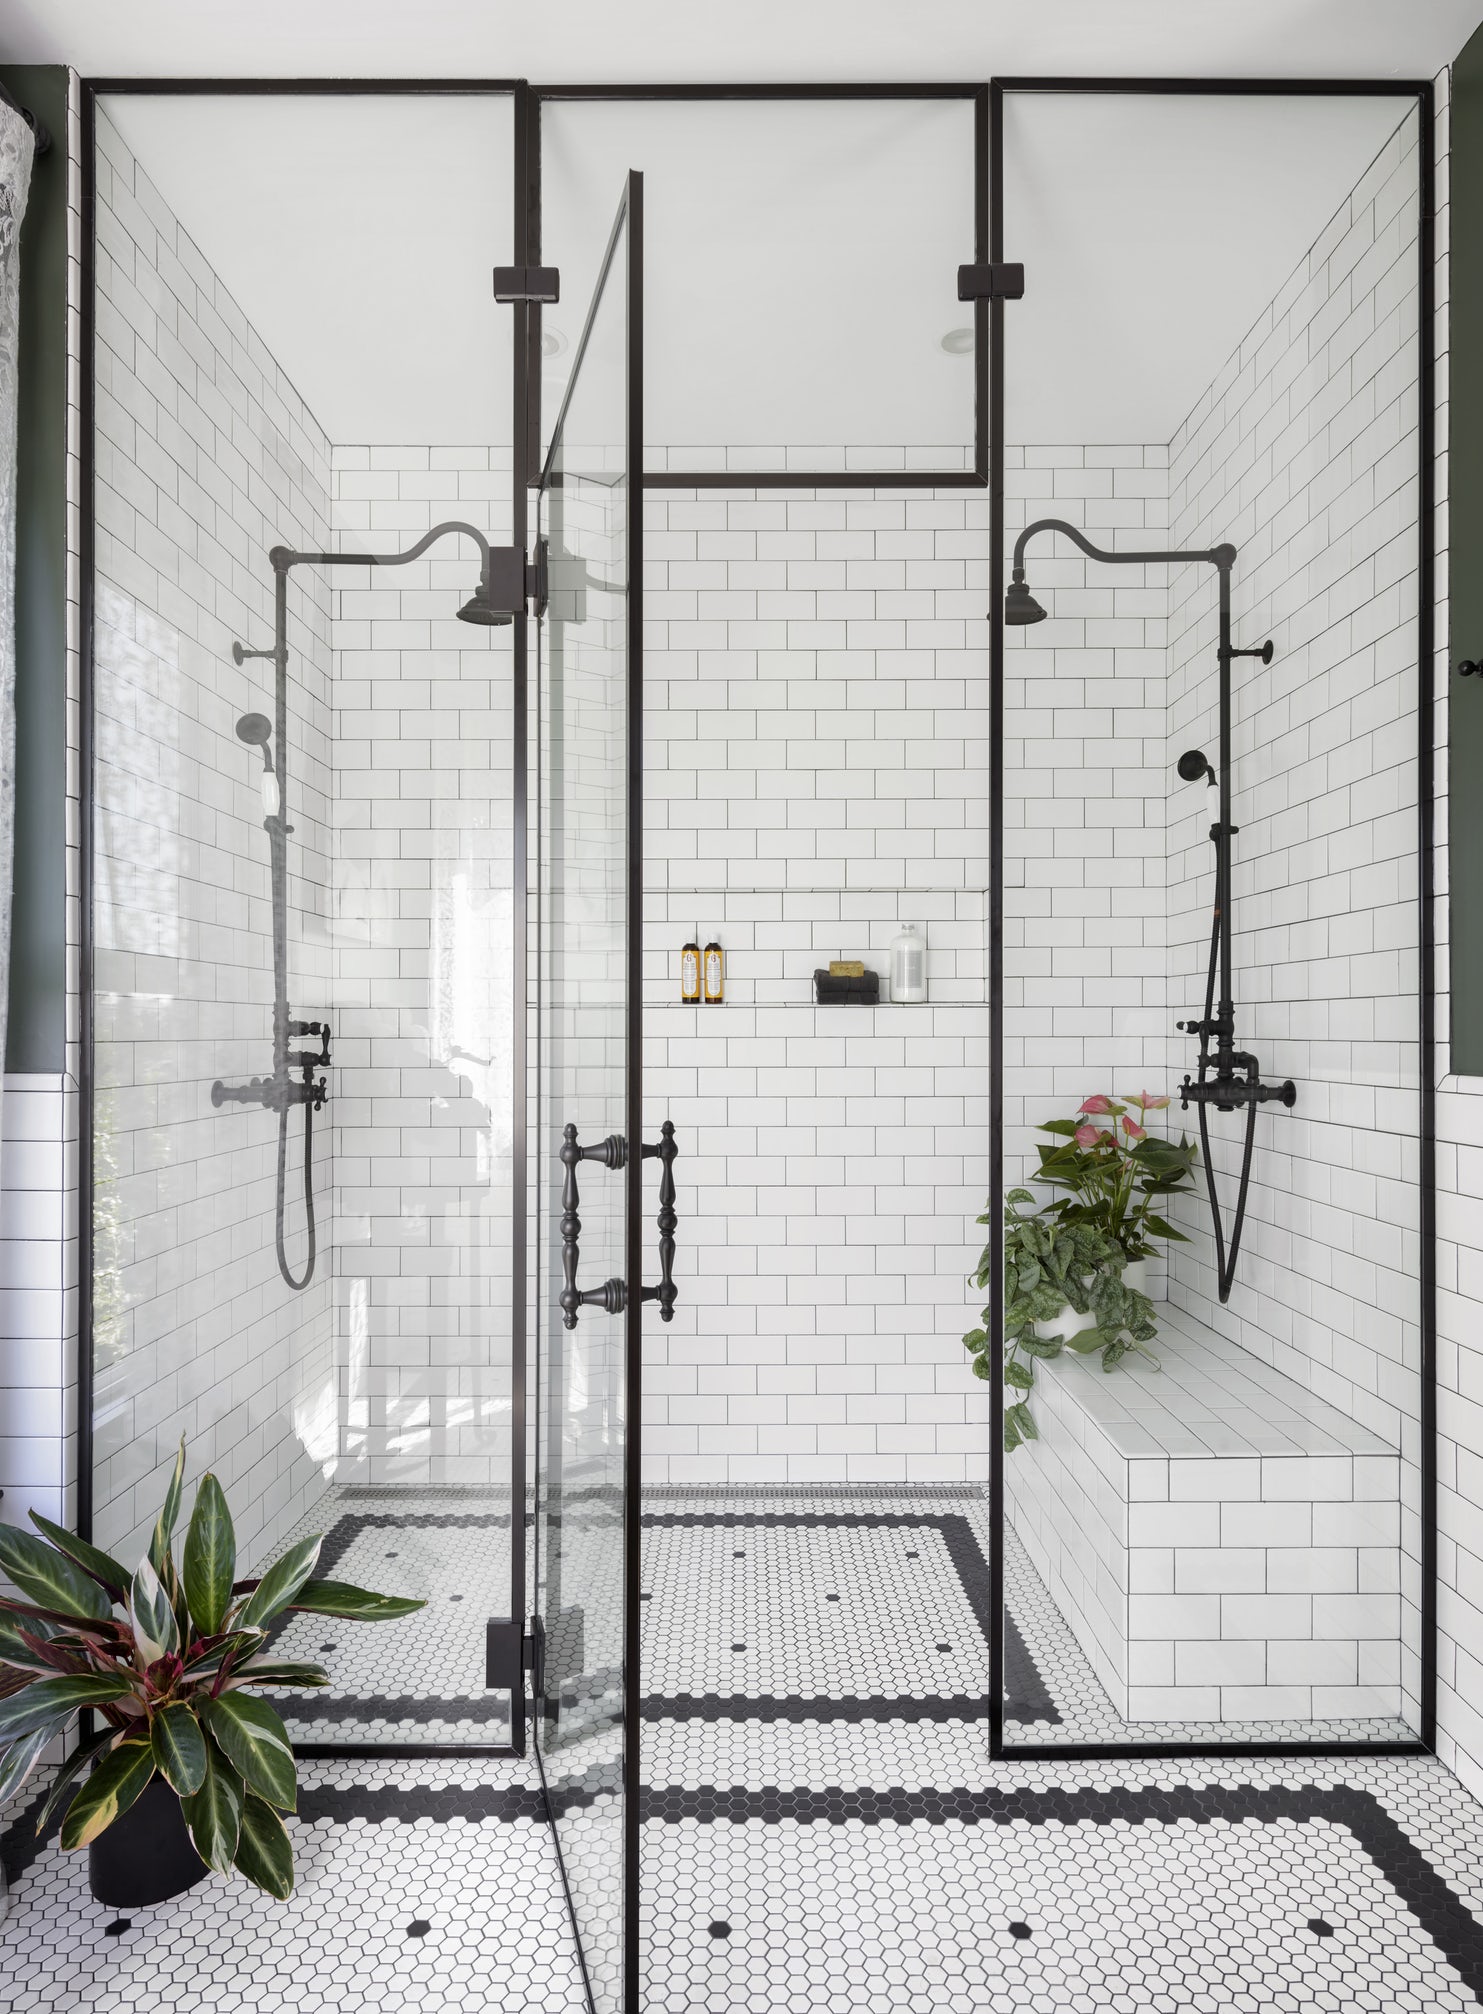 40 Black And White Bathroom Ideas And Designs